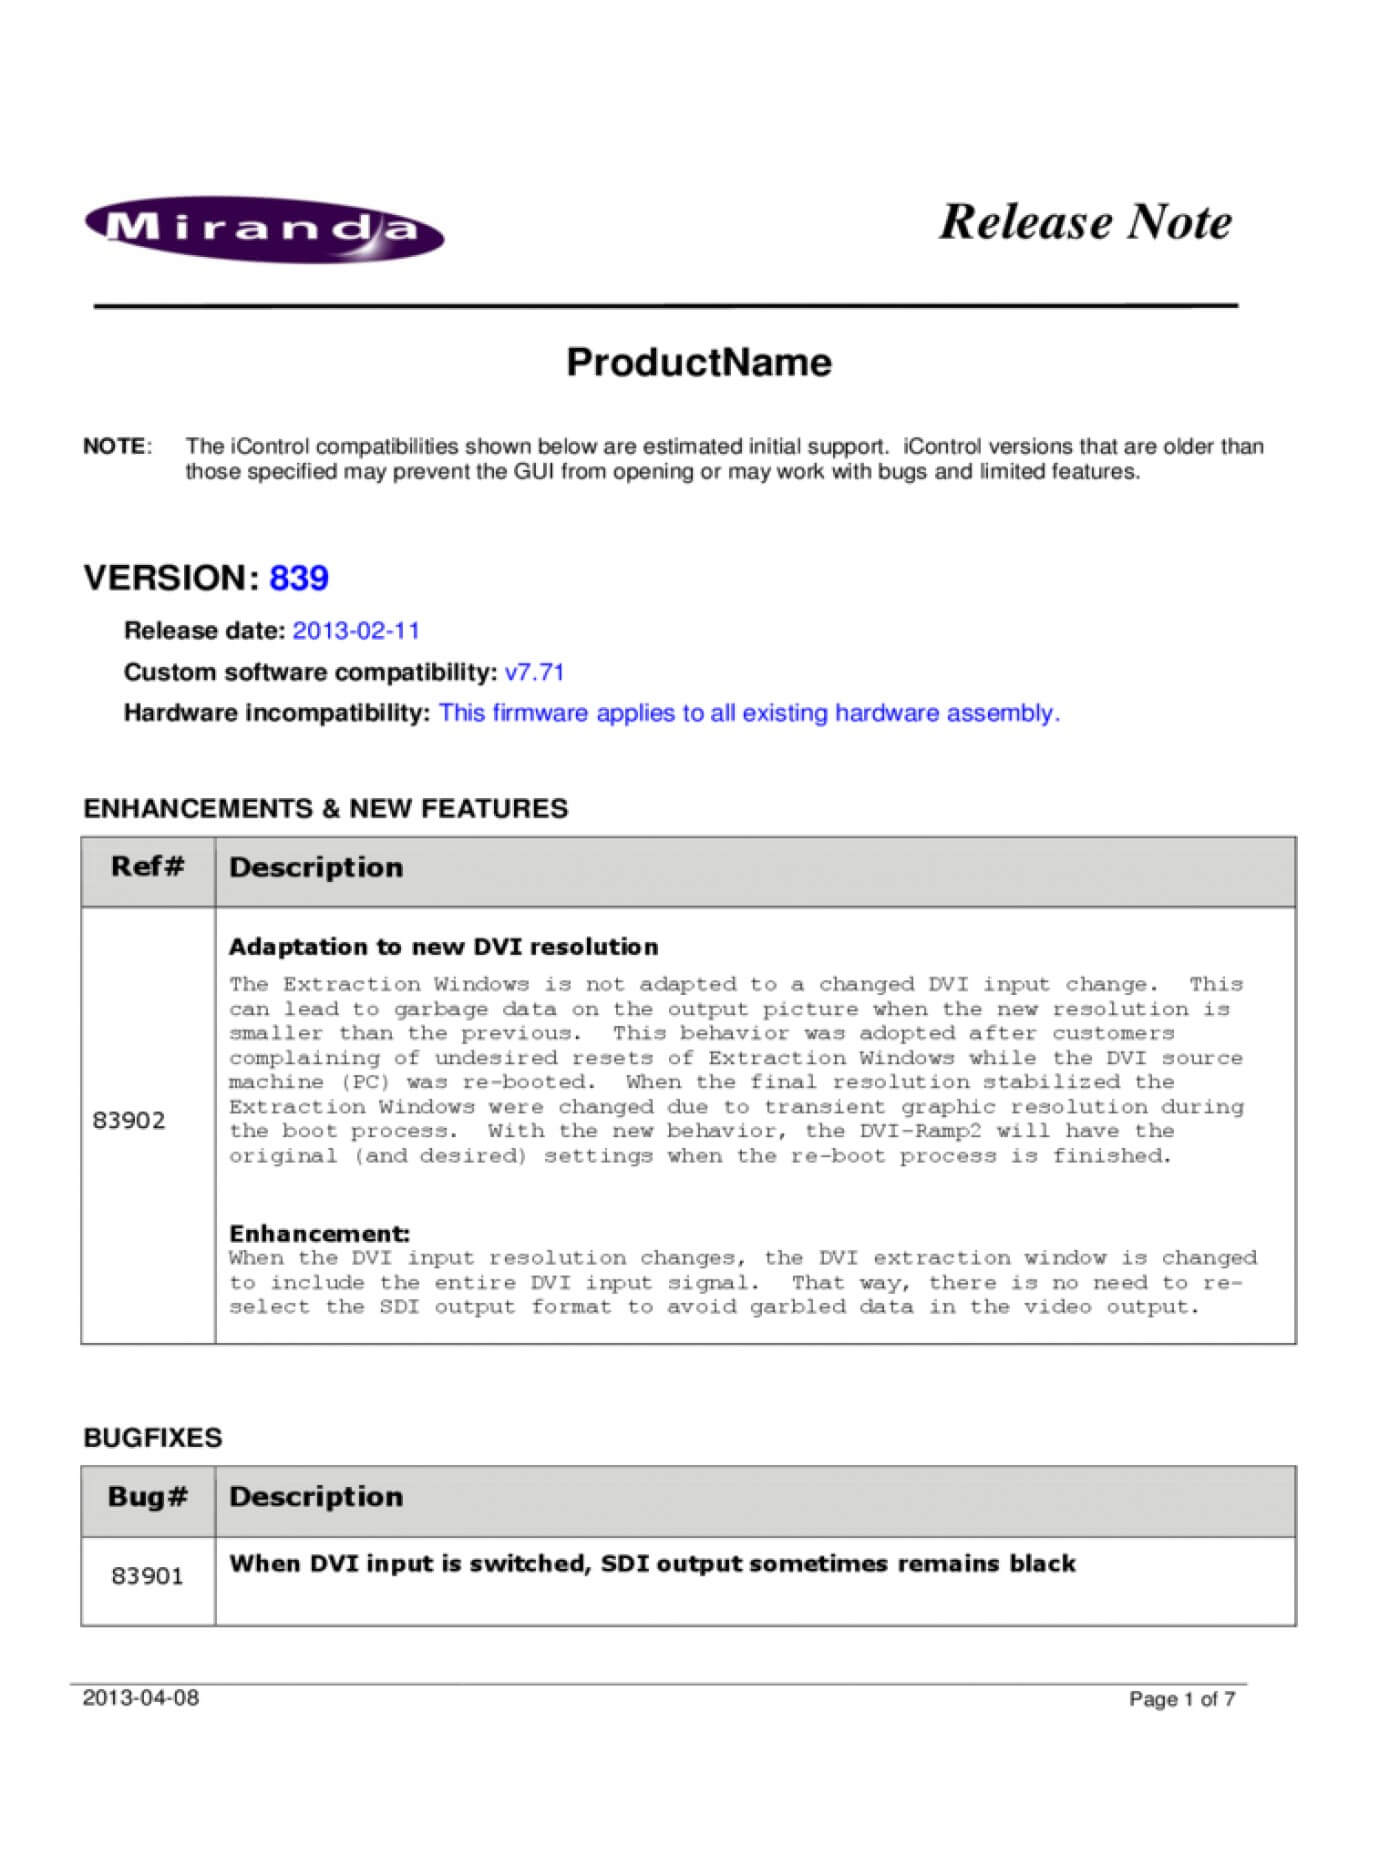 003 Template Ideas Software Release Notes Image2015 Shocking With Software Release Notes Template Word